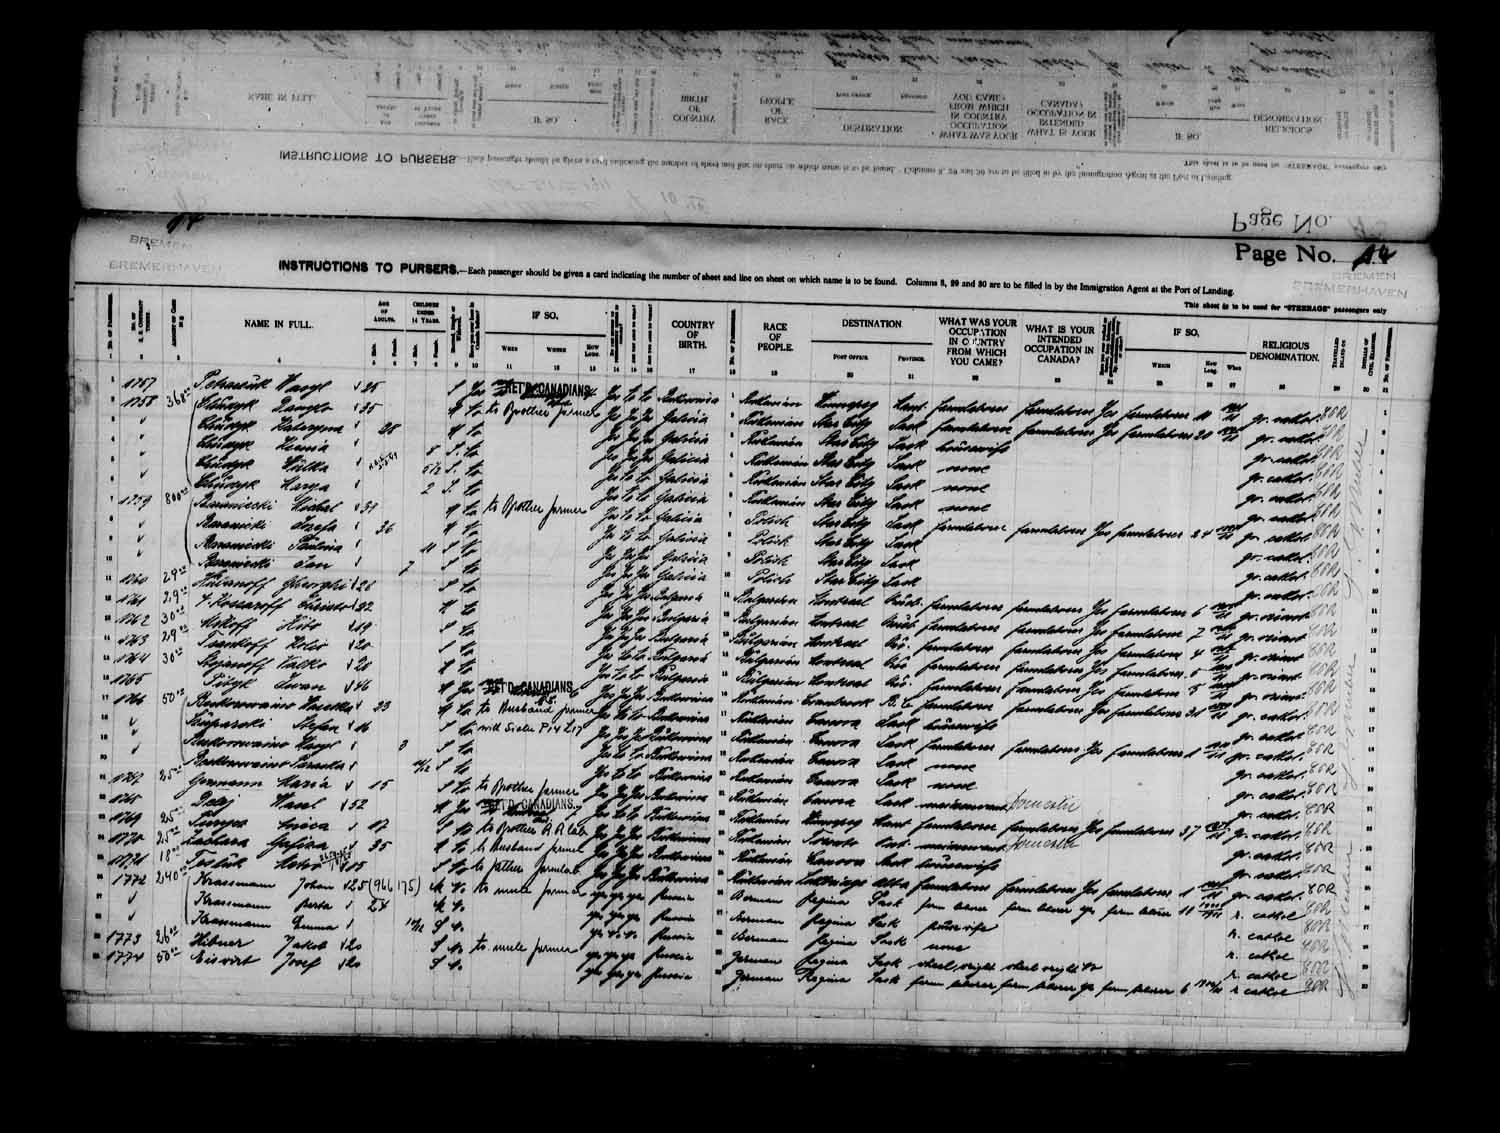 Digitized page of Passenger Lists for Image No.: e003575101